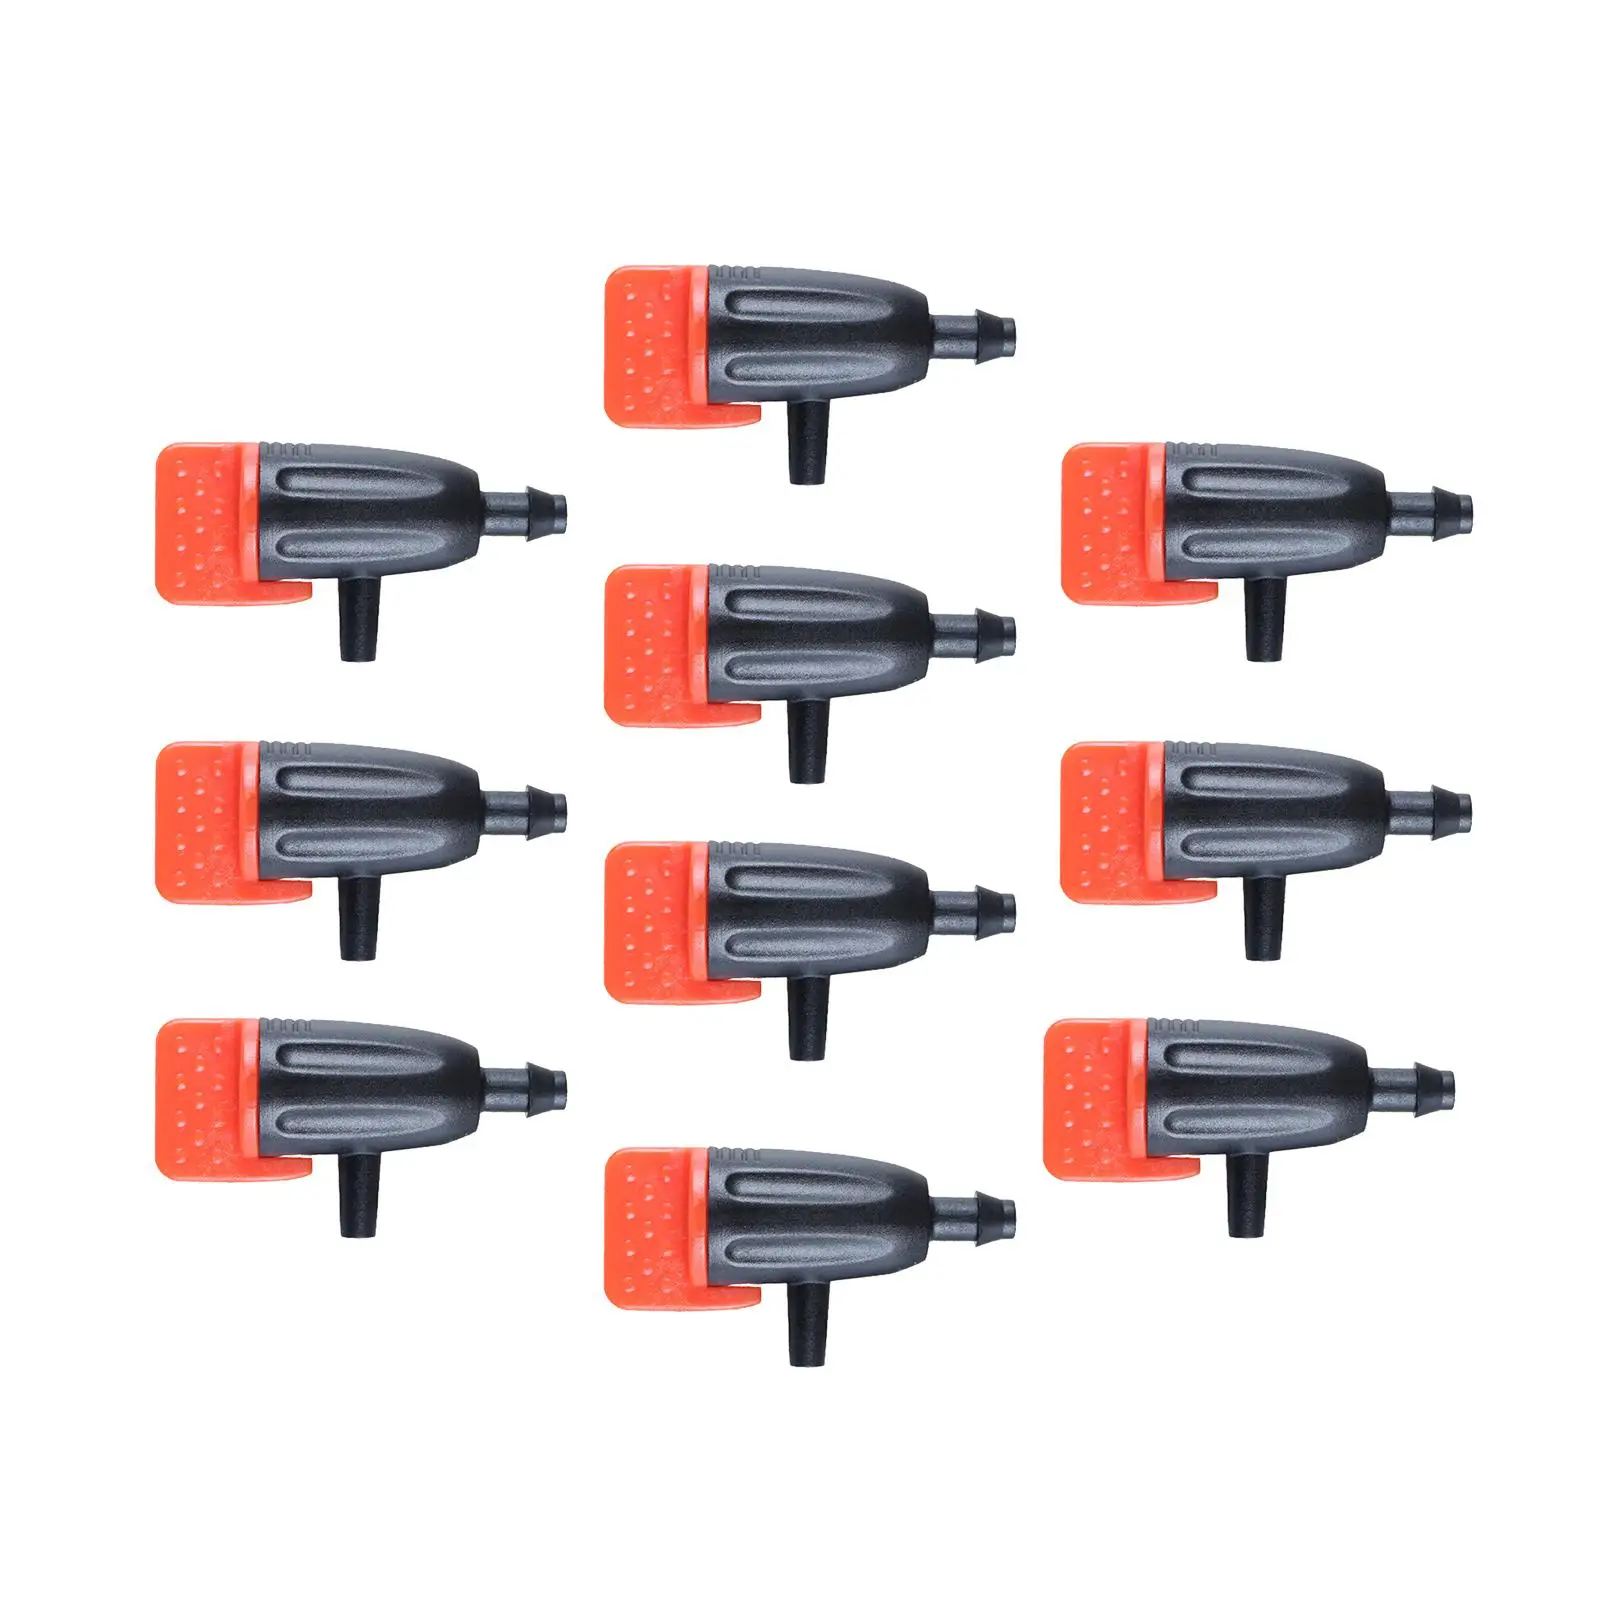 10x Irrigation Dripper Adjustable Watering System Garden Supplies Sprinklers Gardens for 4/7mm Tubing 1/4'' Parts Micro Drips